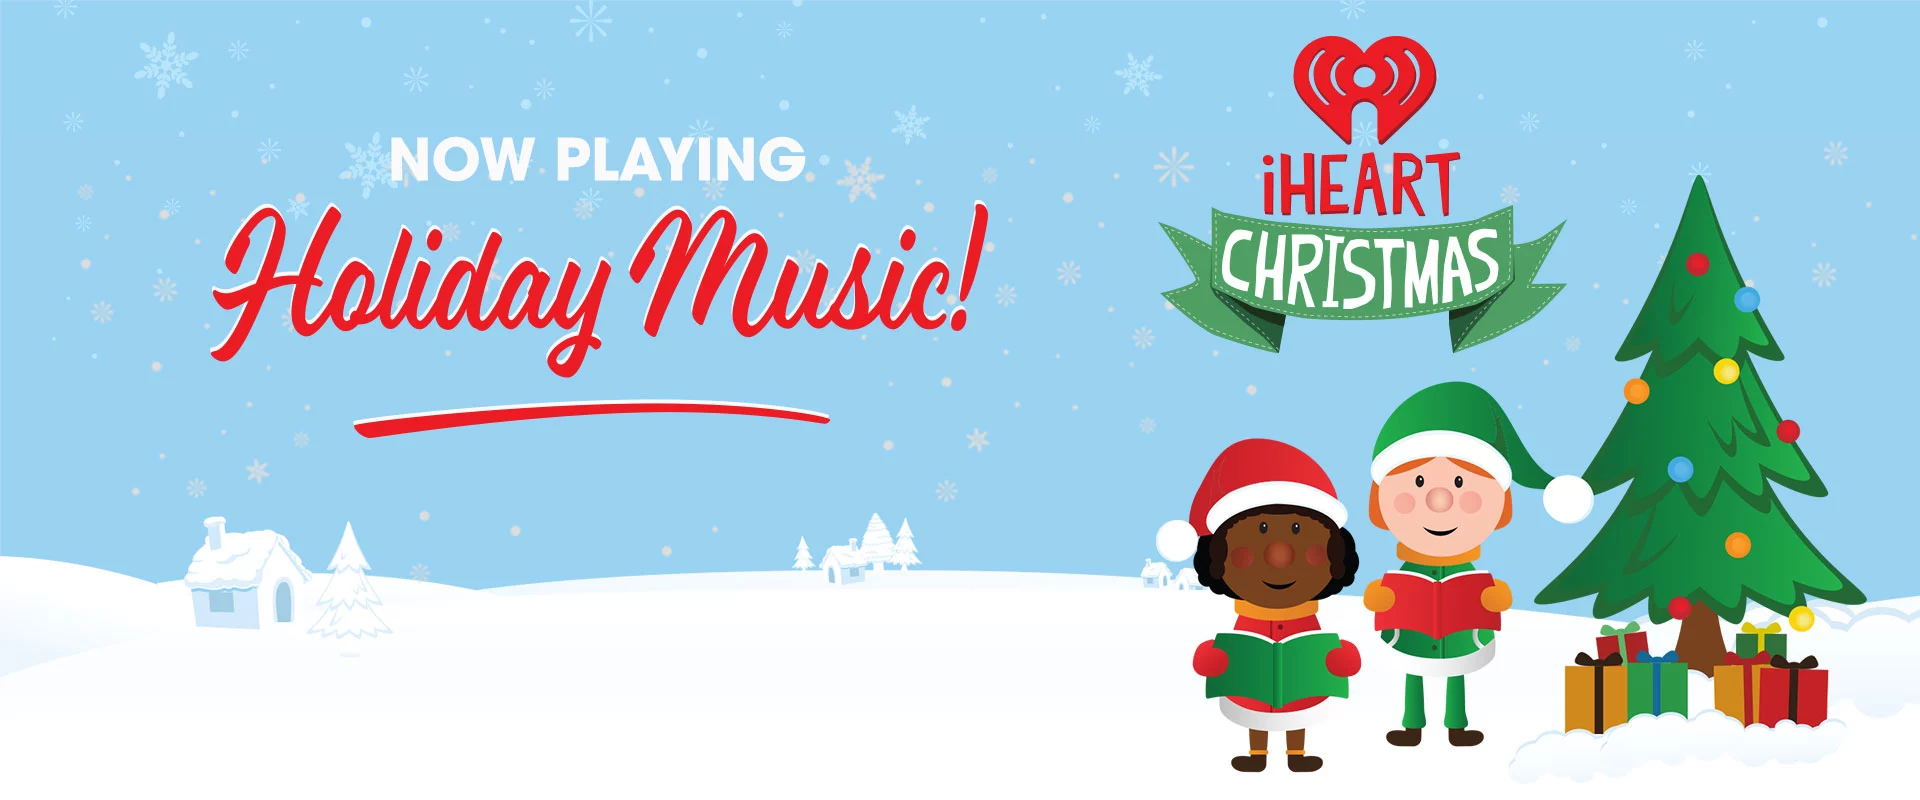 iHeart Christmas - Sing Along to Festive Favorites and Enter for a Chance to Win $10,000!